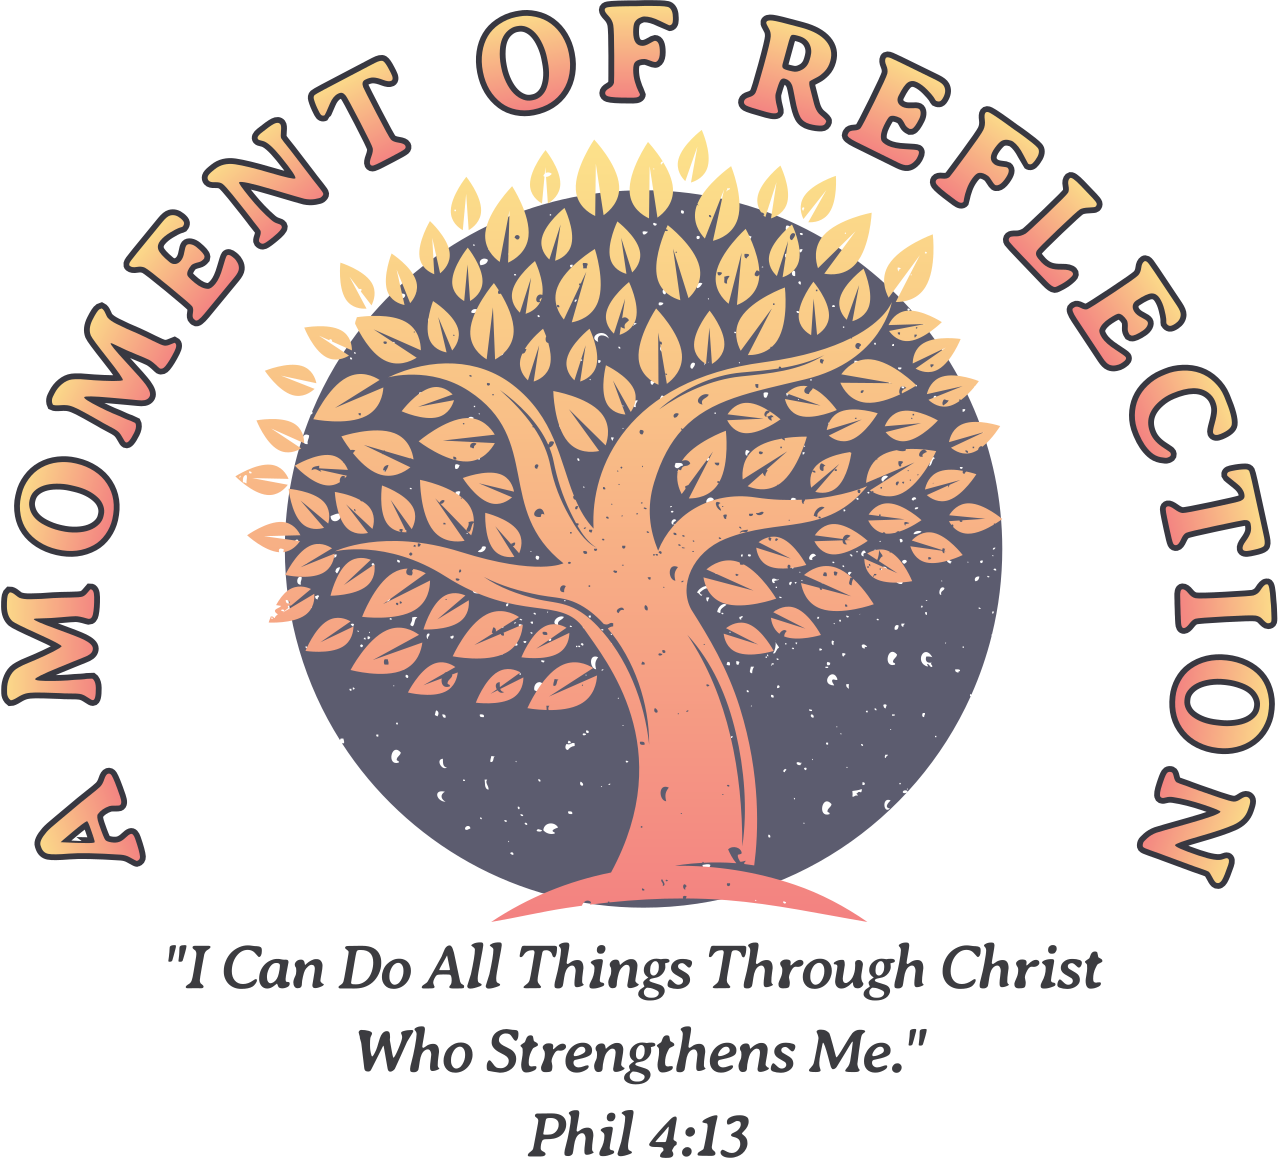 A MOMENT OF REFLECTION's logo